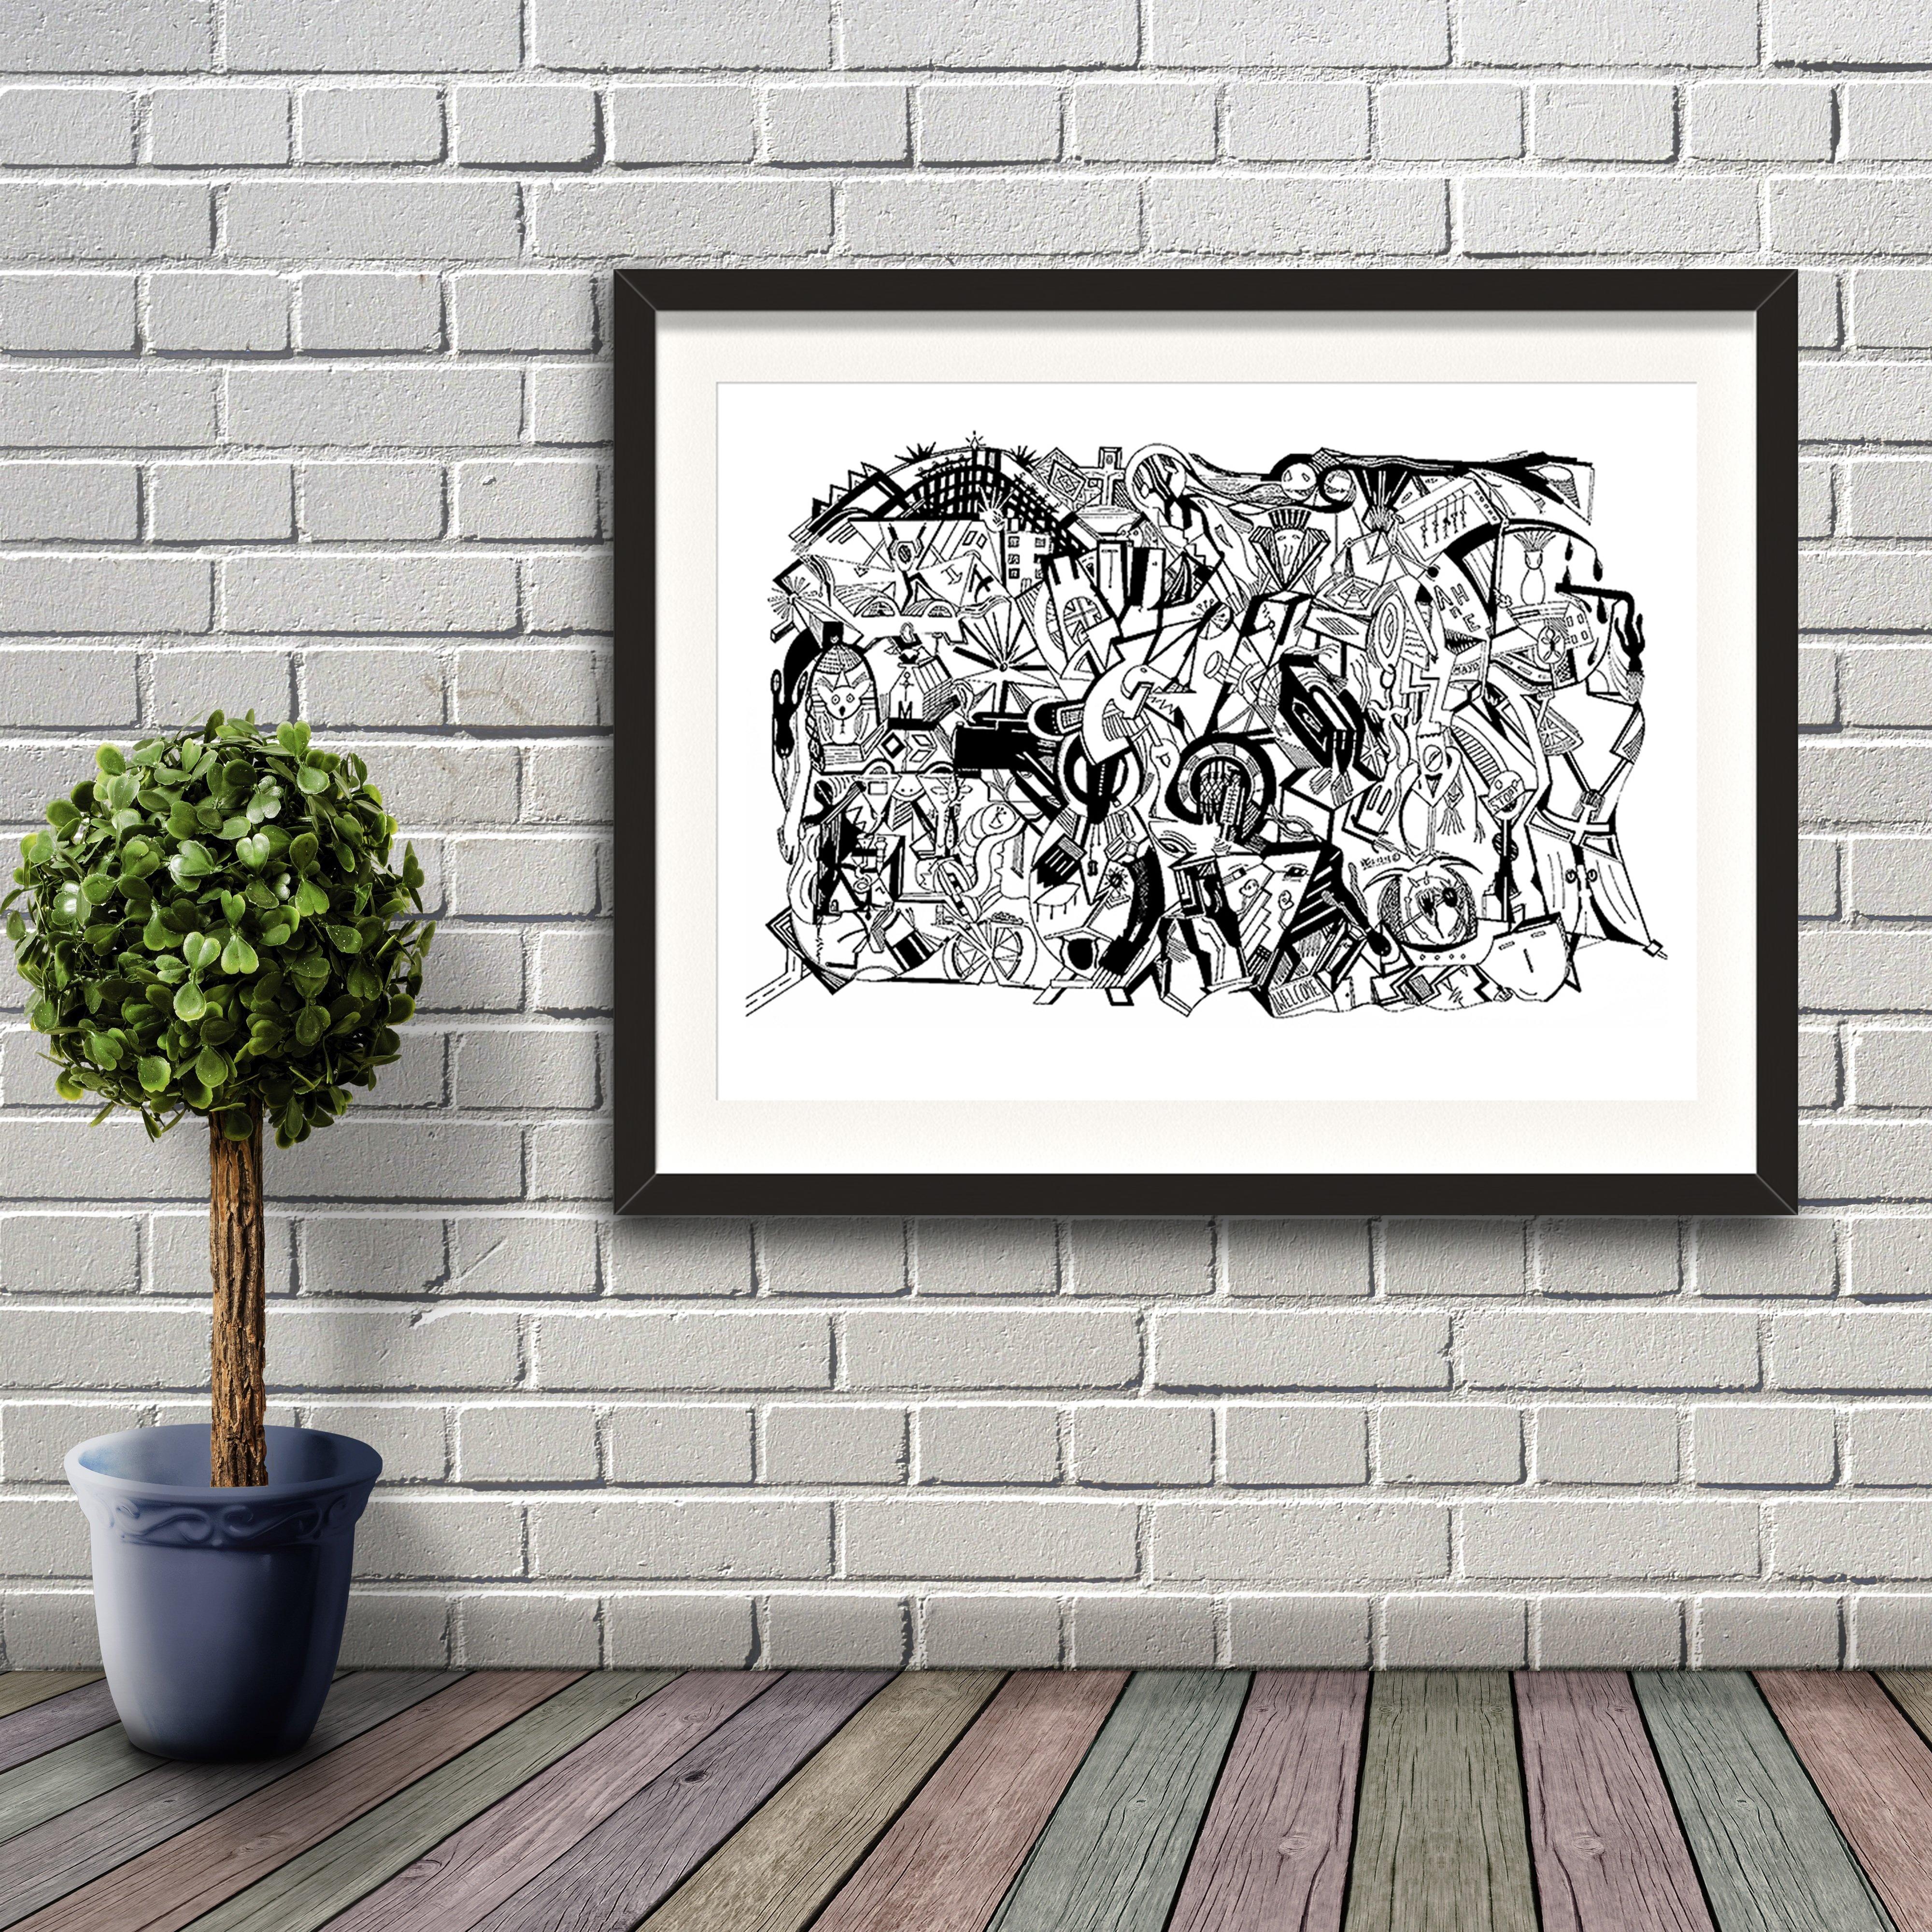 A fine art print from Jason Clarke titled Congestion drawn with a black Pentel pen. Artwork shown in a black frame hanging on a brick wall.